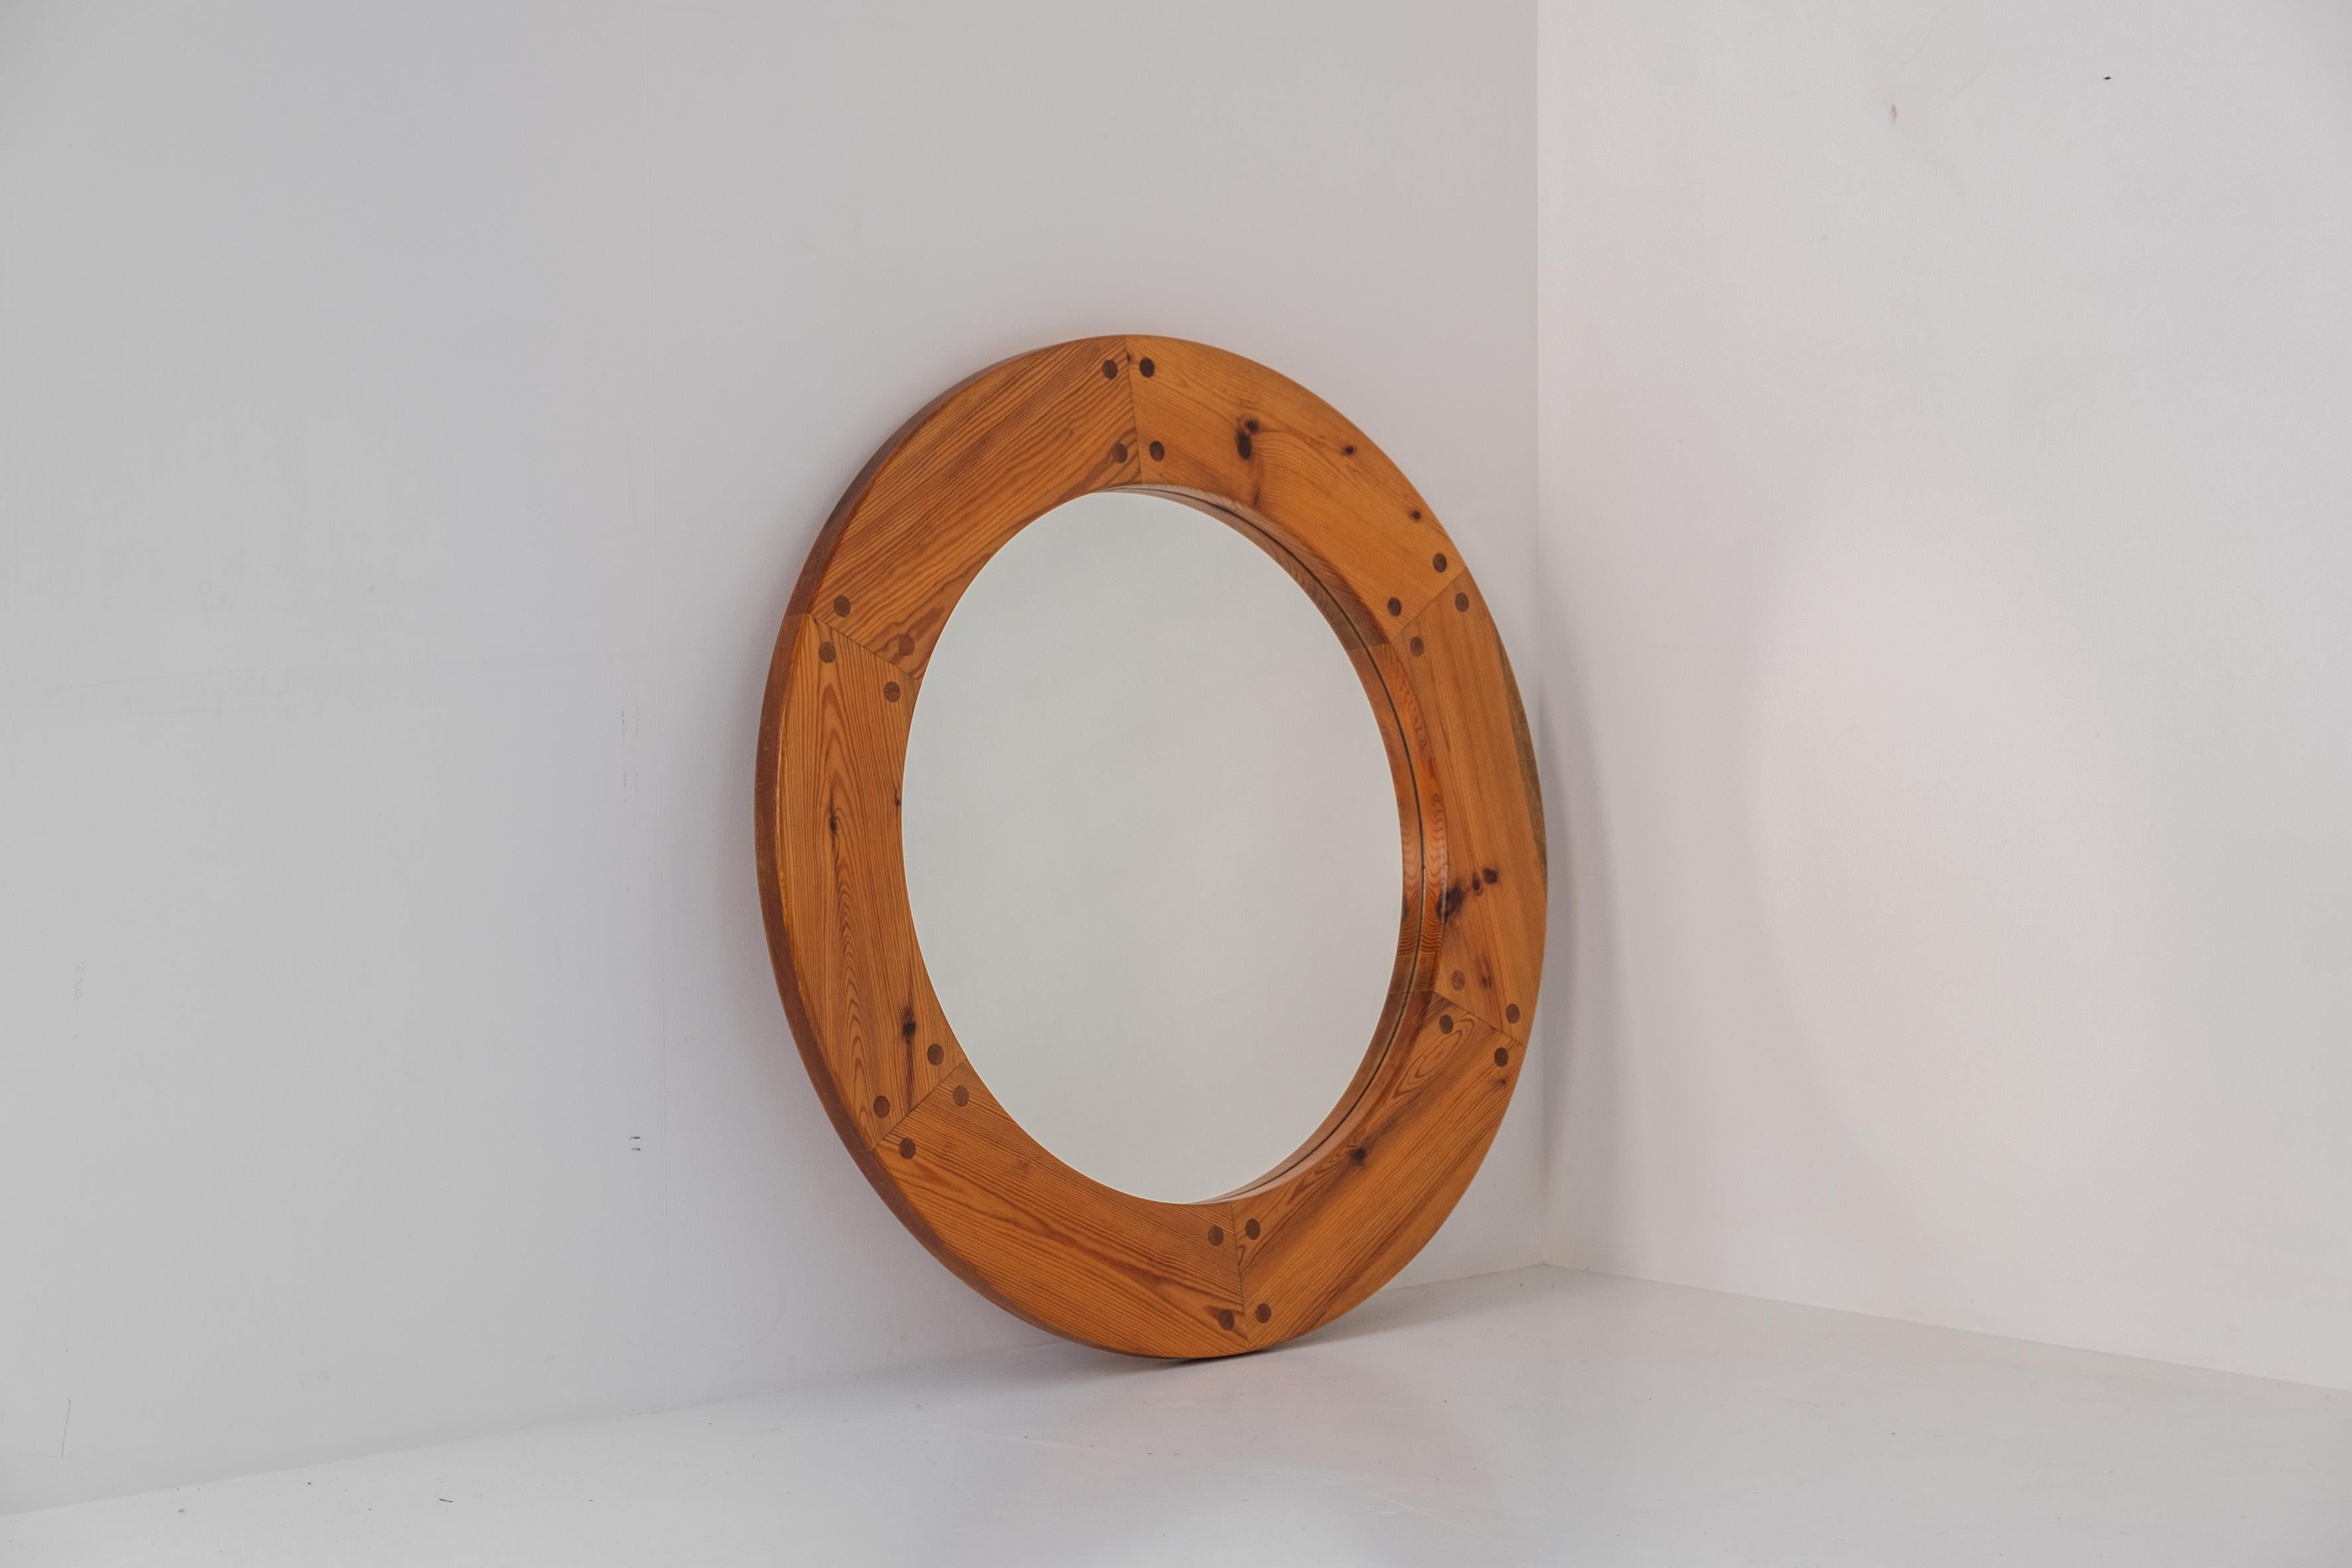 Lovely round mirror by Uno & Östen Kristiansson for Luxus Vittsjö Möbelfabrik Sweden, 1960s. This large mirror has a solid pine wooden frame with decorative integrated wooden nails. Presented in its original and good condition with only minor wear.